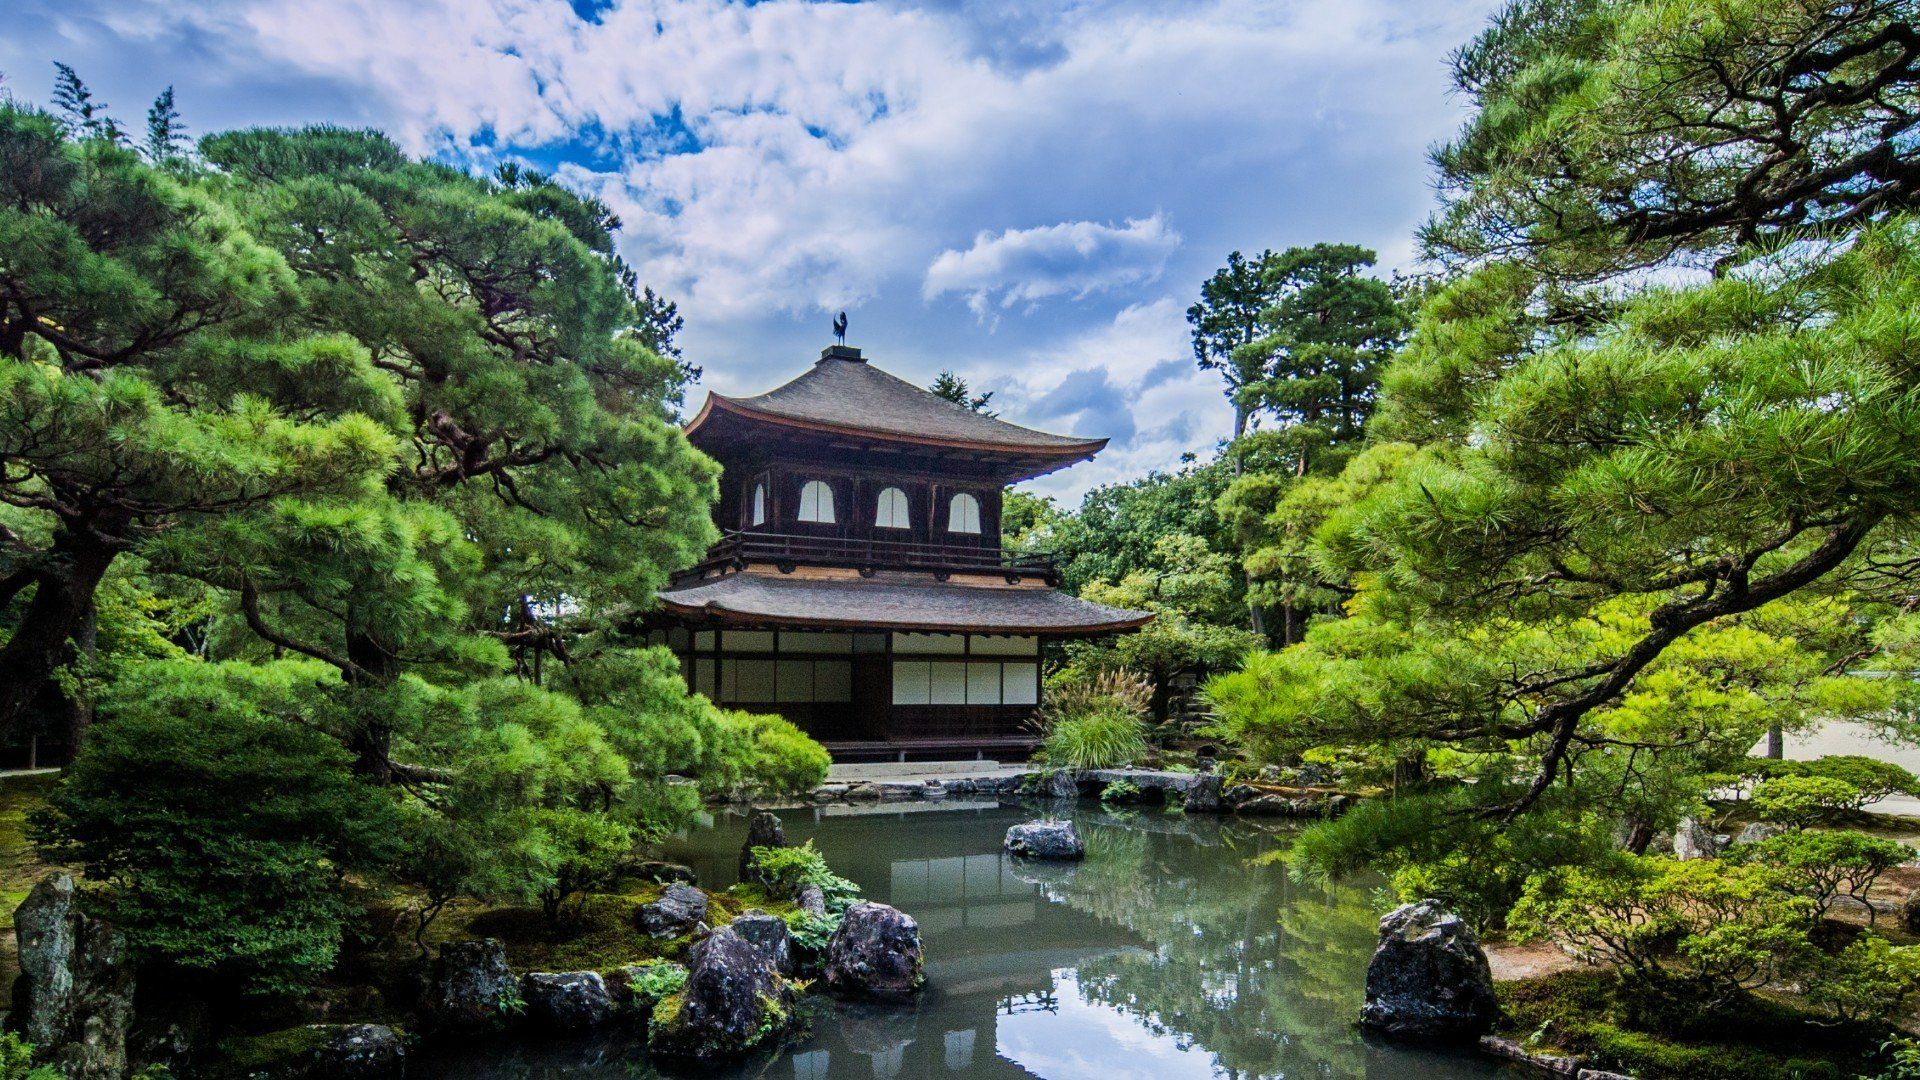 kyoto 1080P 2k 4k HD wallpapers backgrounds free download  Rare Gallery